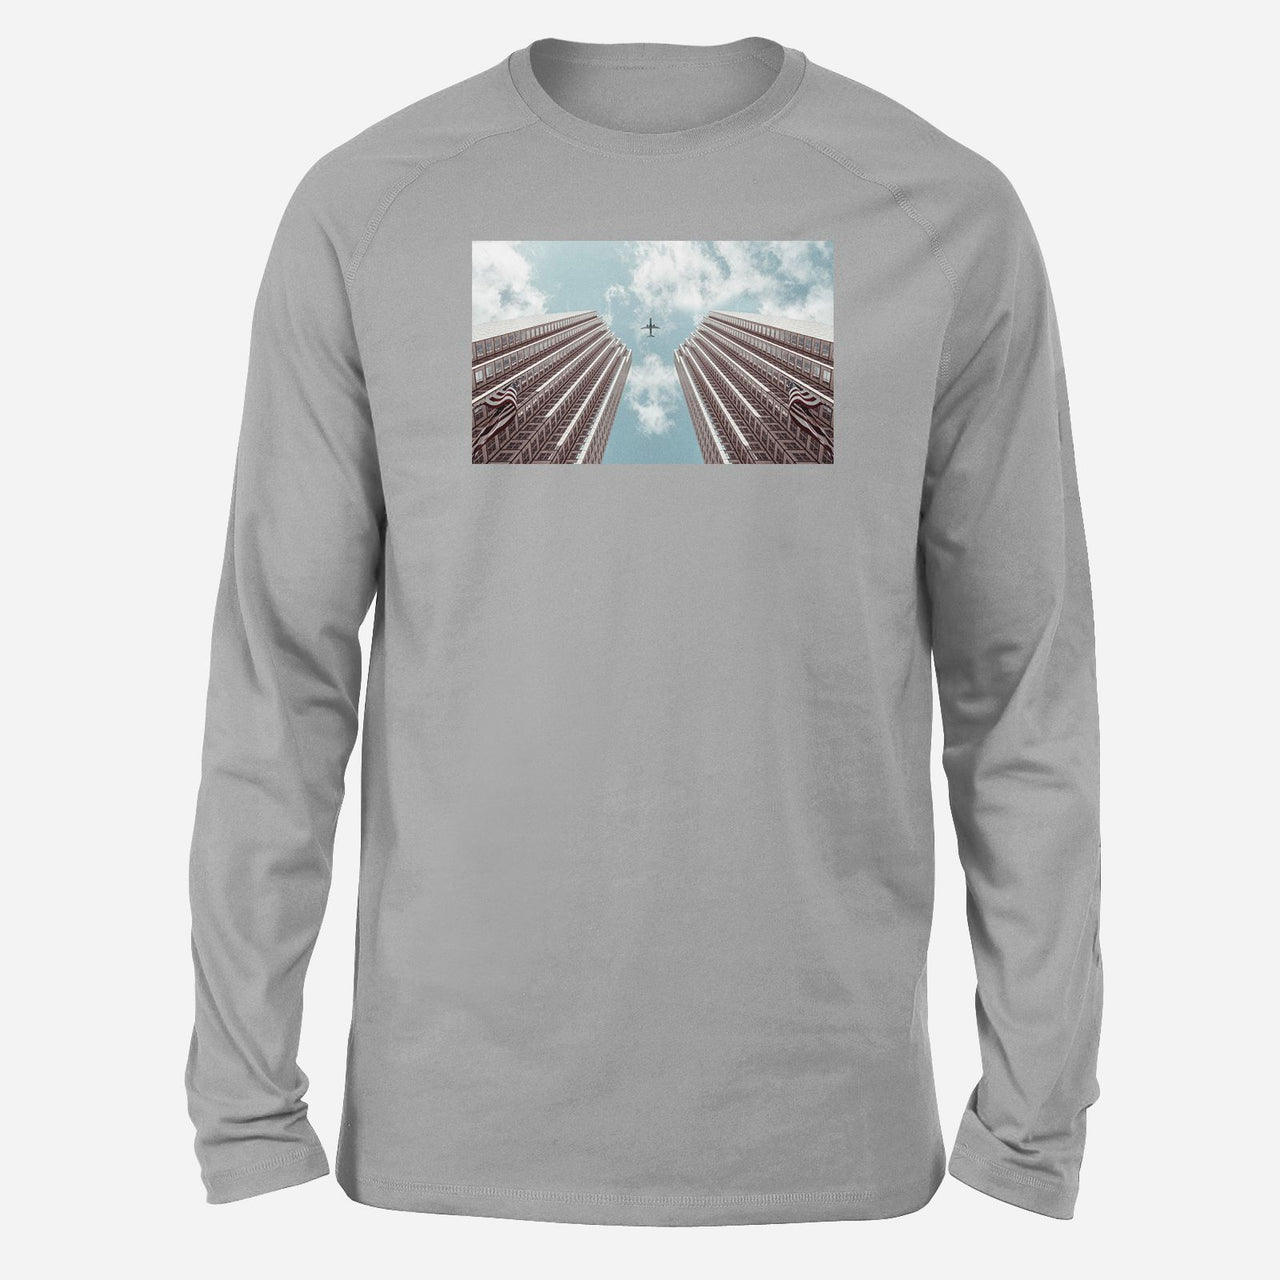 Airplane Flying over Big Buildings Designed Long-Sleeve T-Shirts